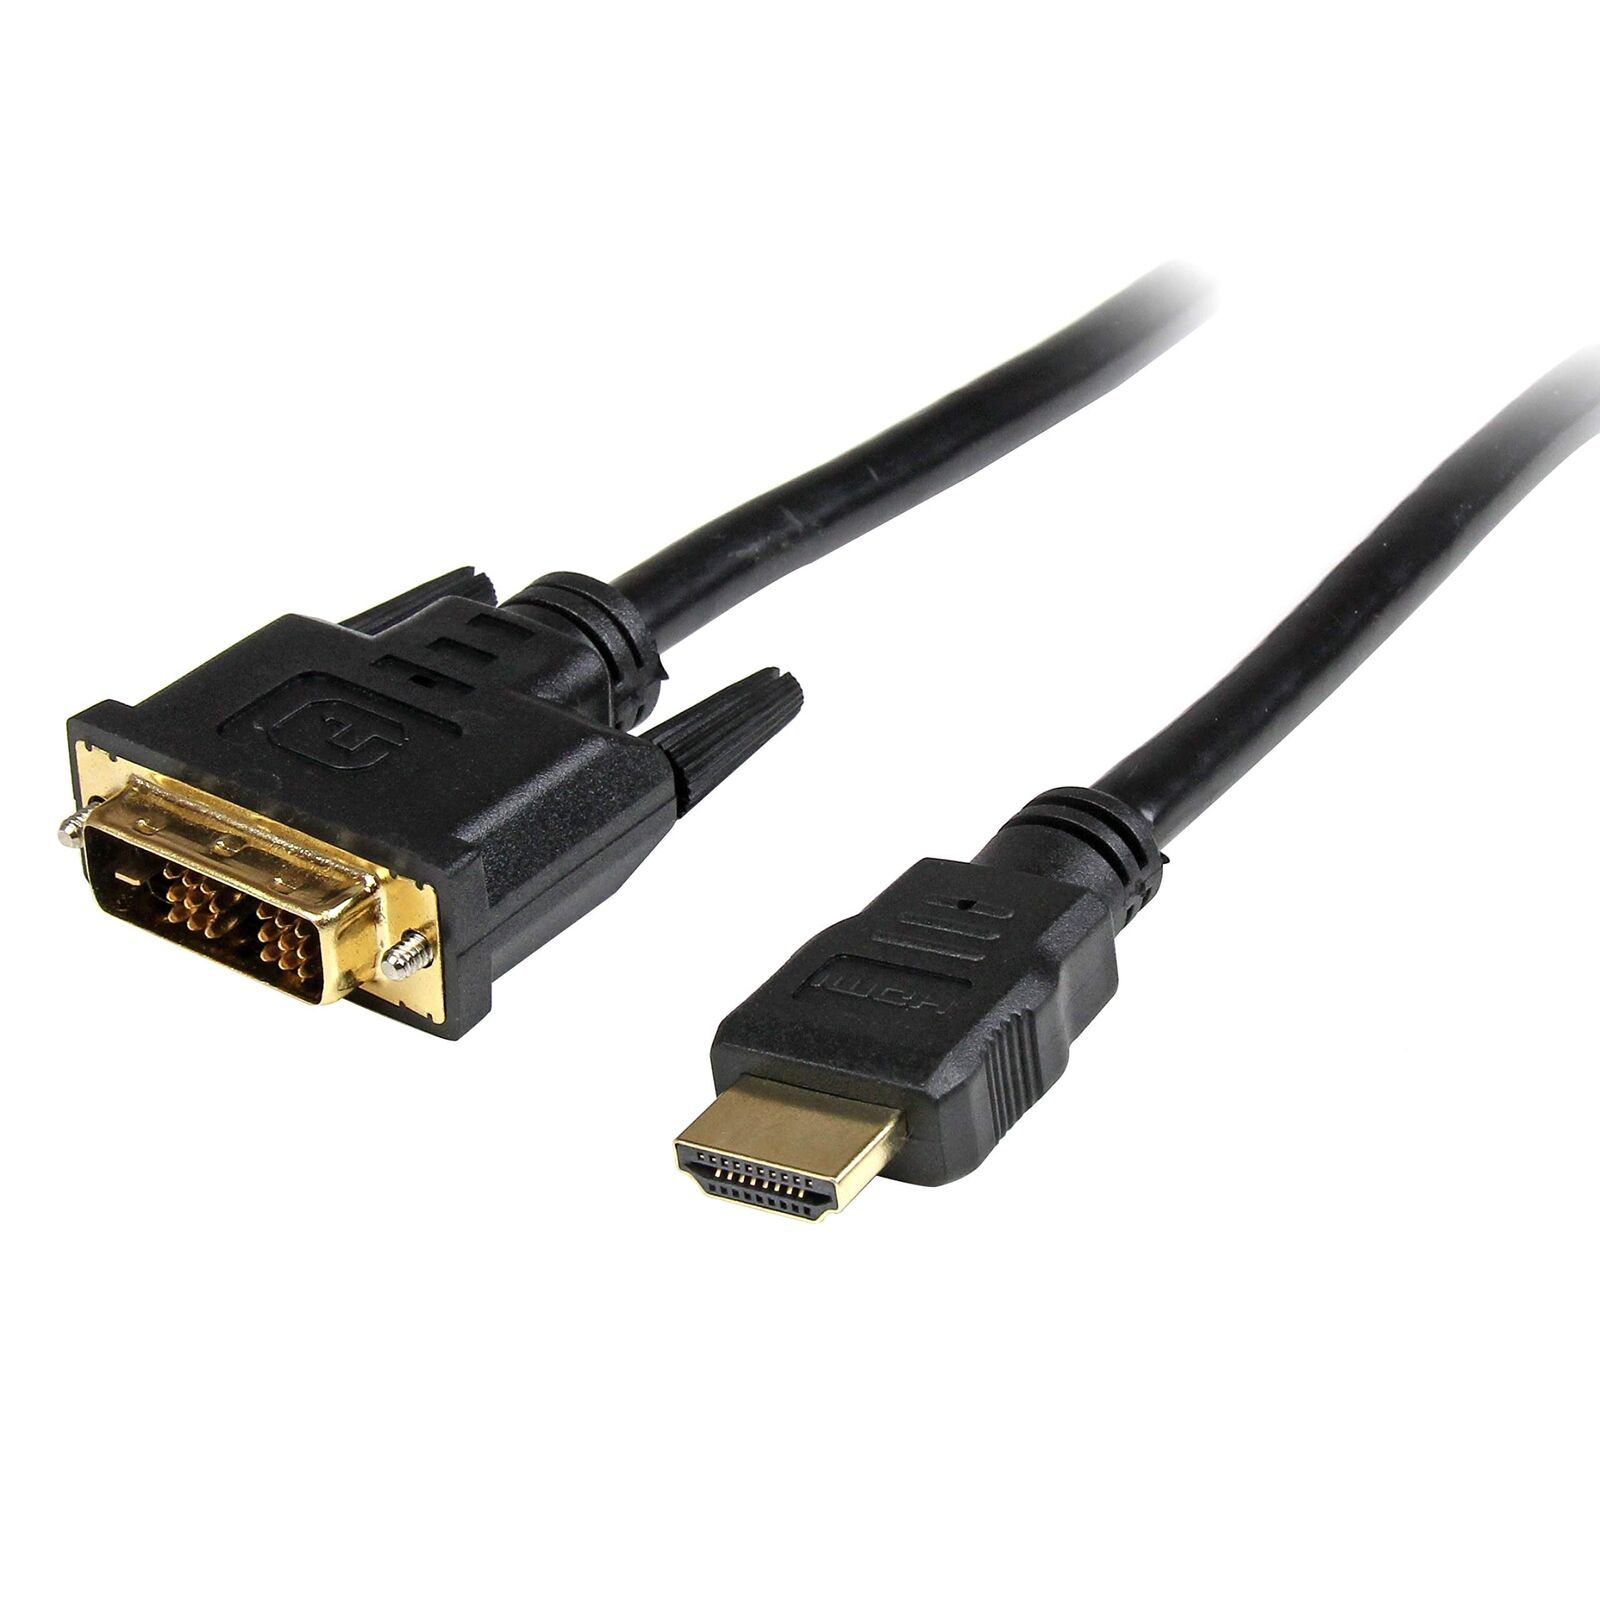 StarTech.com 1m HDMI to DVI-D Adapter Cable - M/M - HDMI to DVI-D Video Monitor 